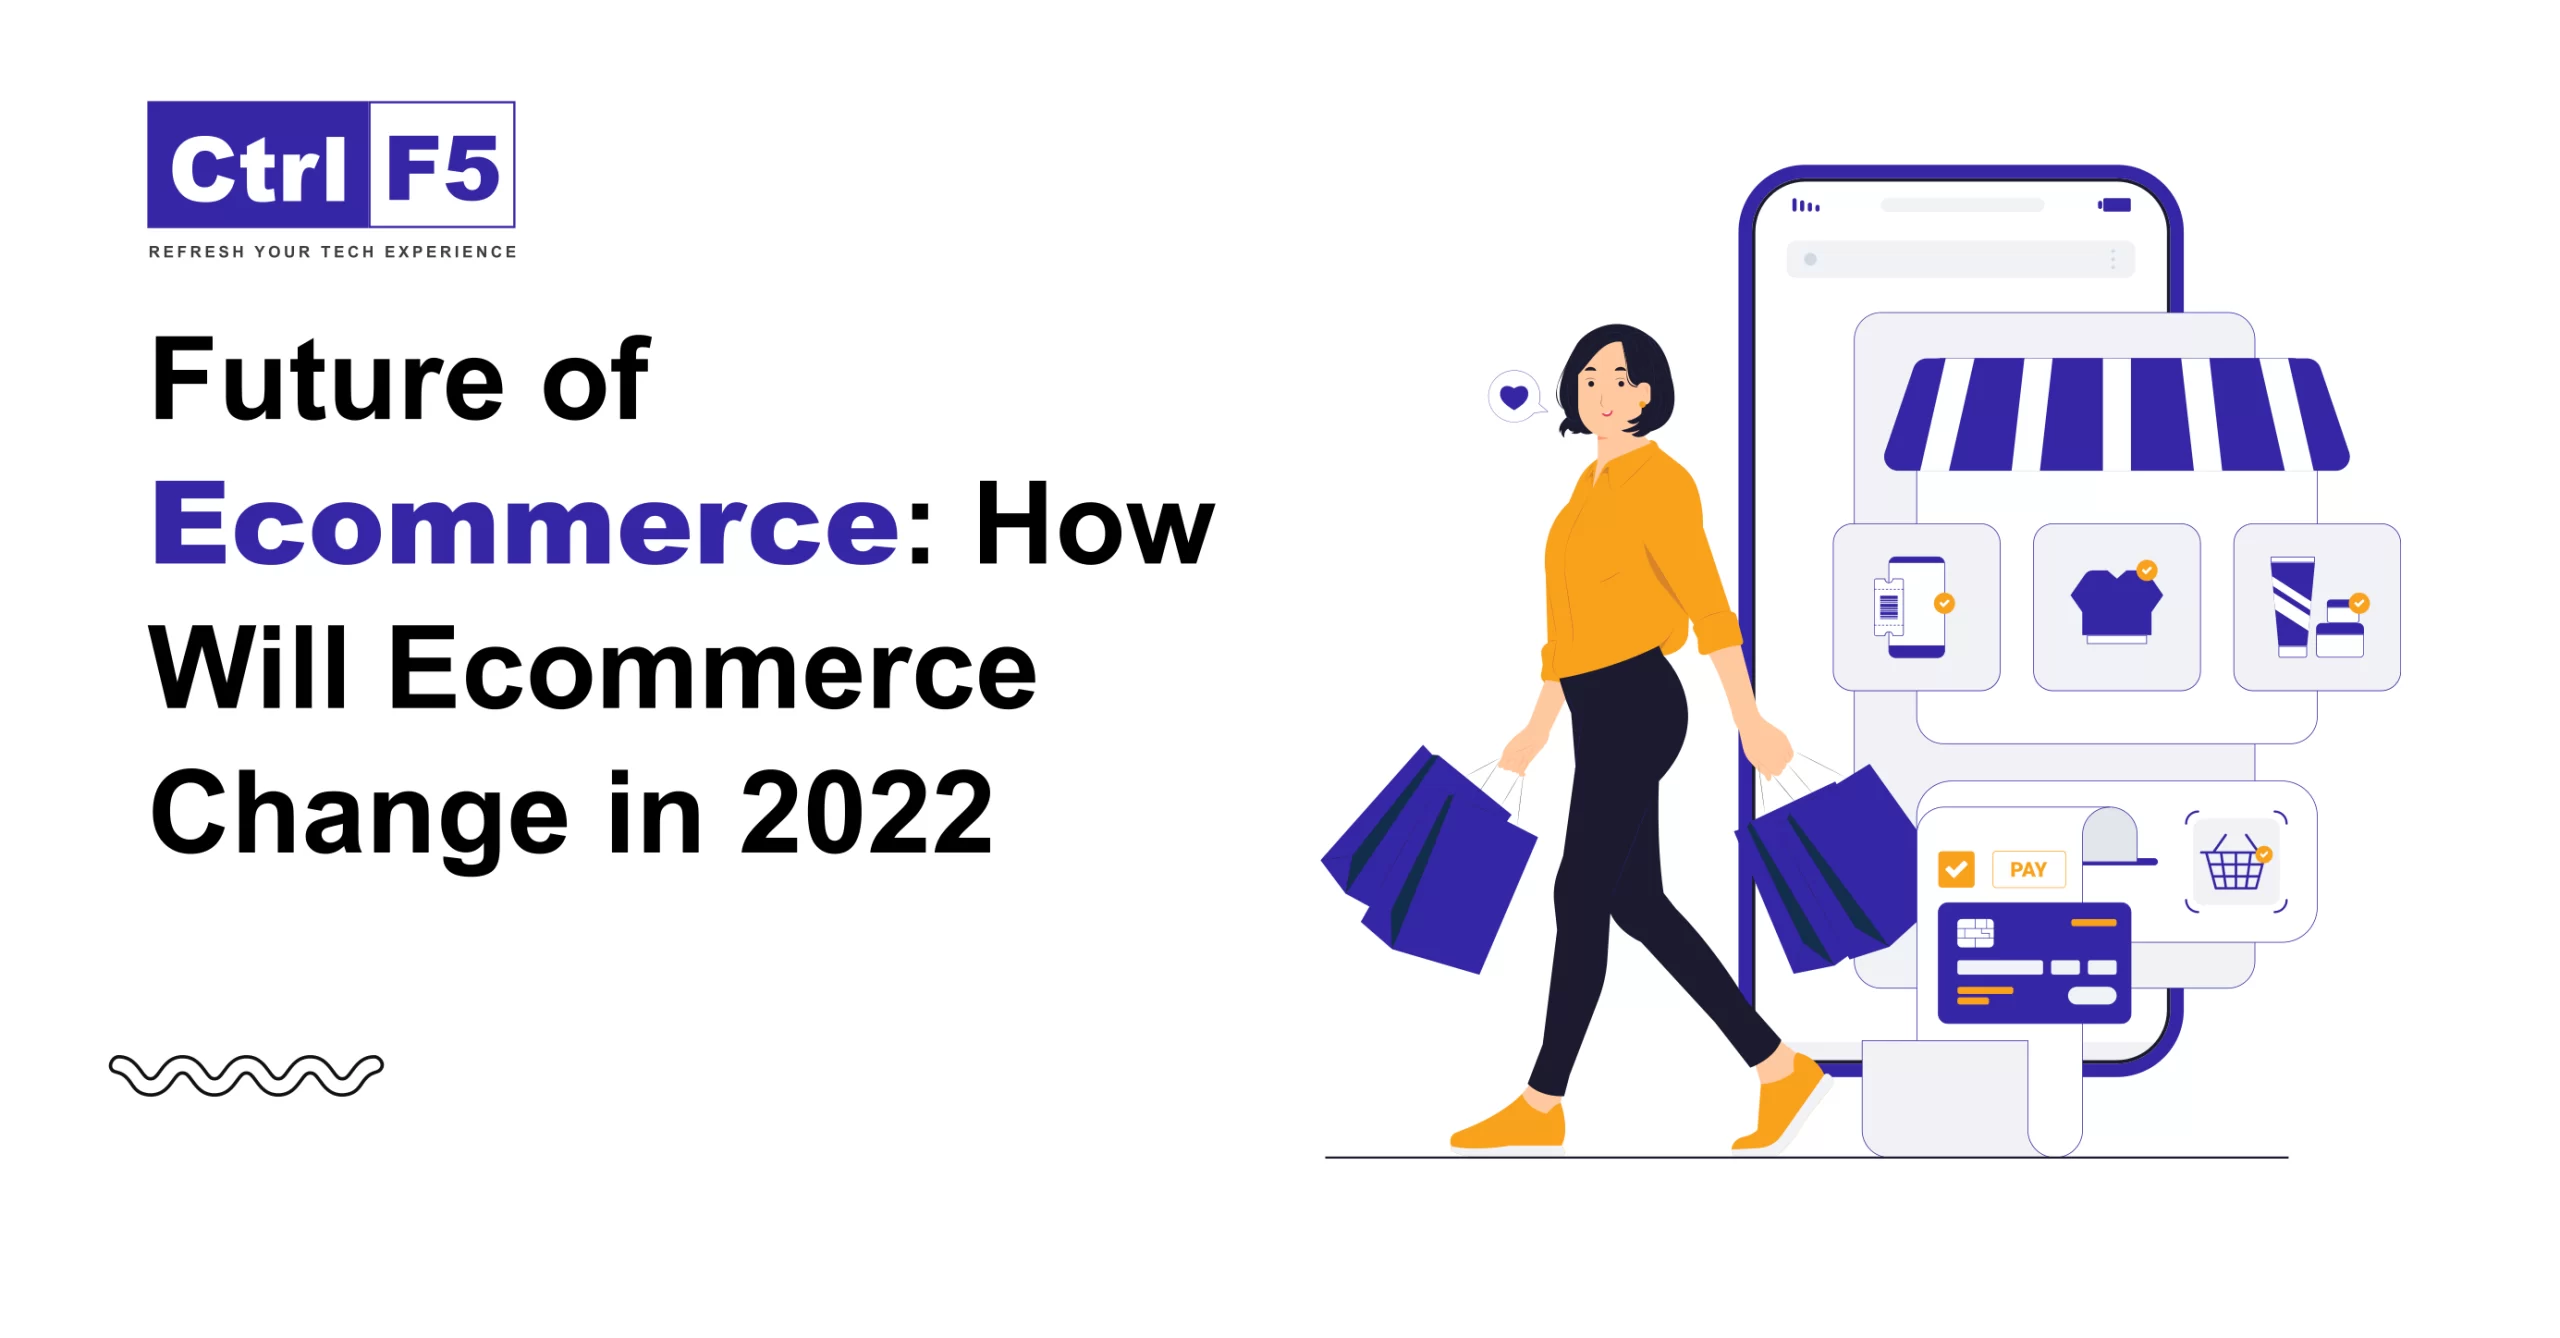 Future of Ecommerce: How Will Ecommerce Change in 2022